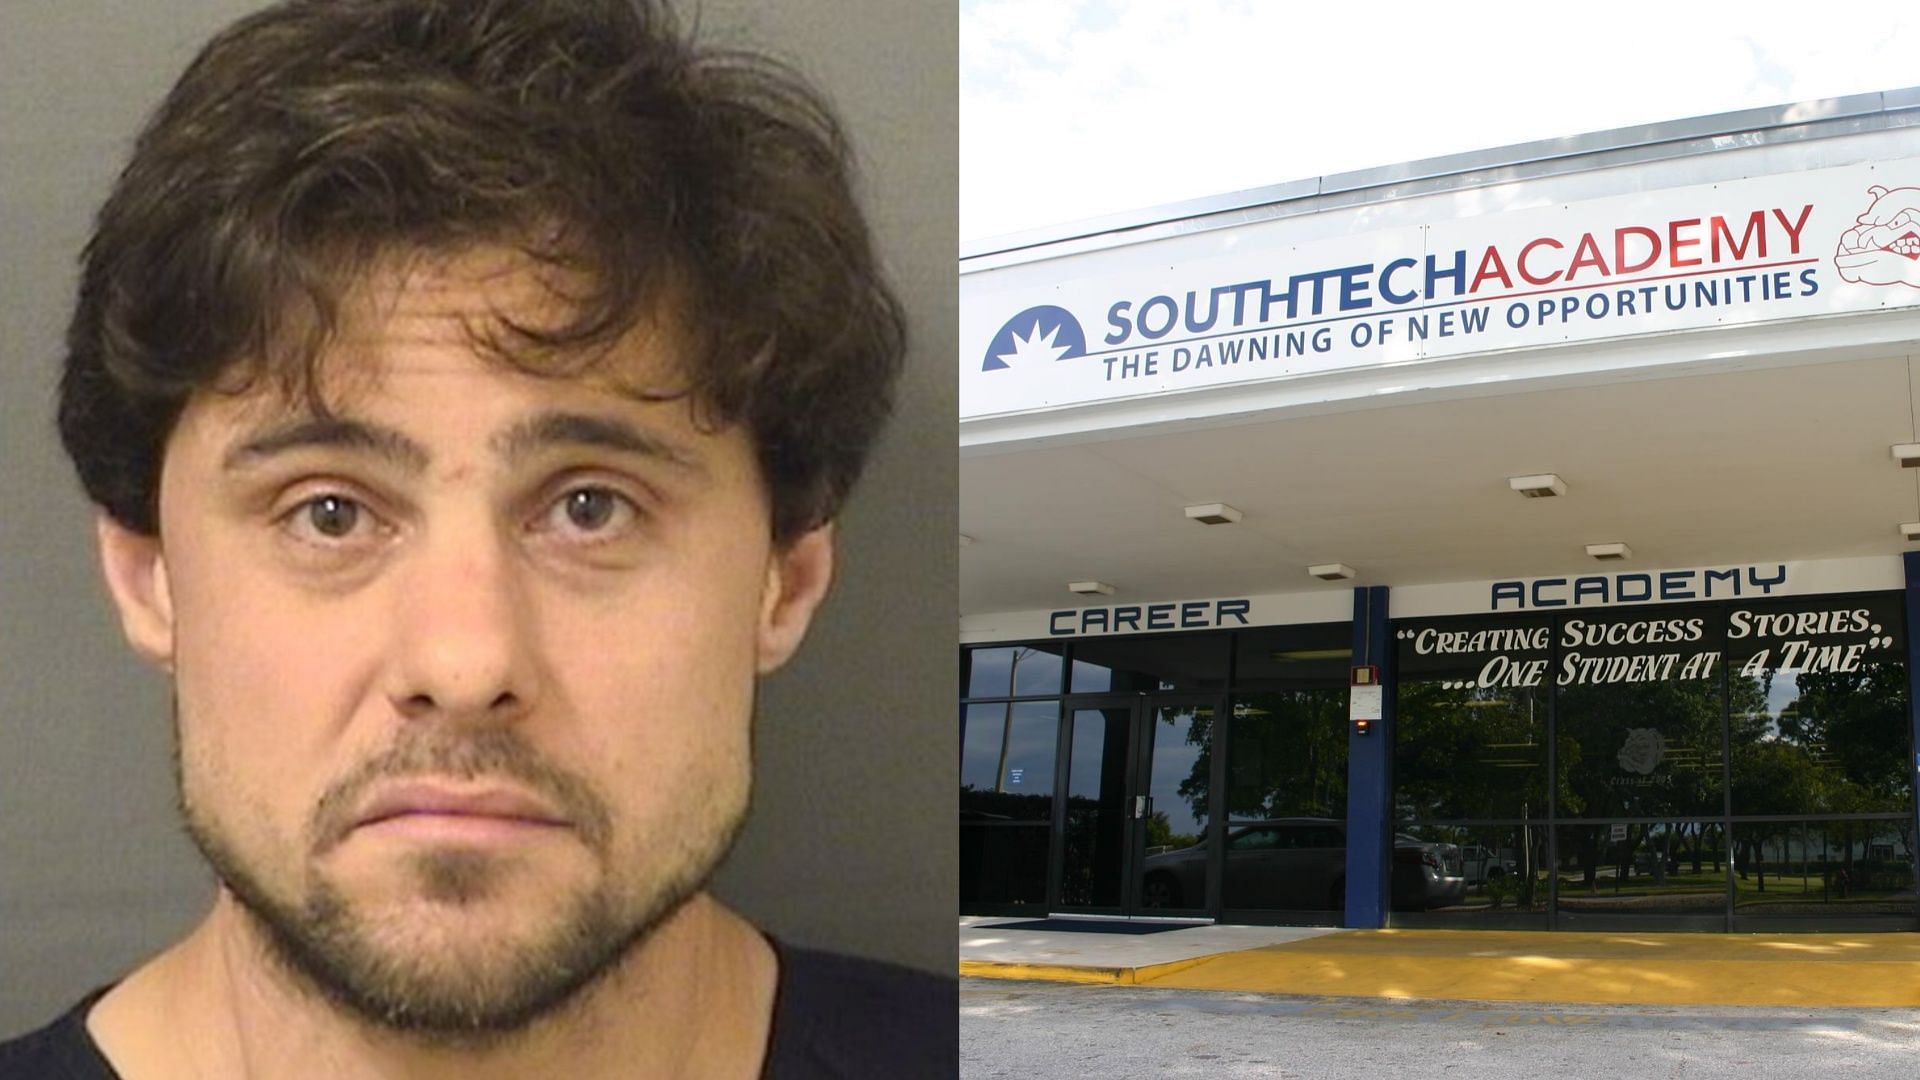 Damian Conti, an English teacher at SouthTech Academy was arrested over improper s*xual relationship with a student. (Image via Facebook/BJ Williams, SouthTech Academy)